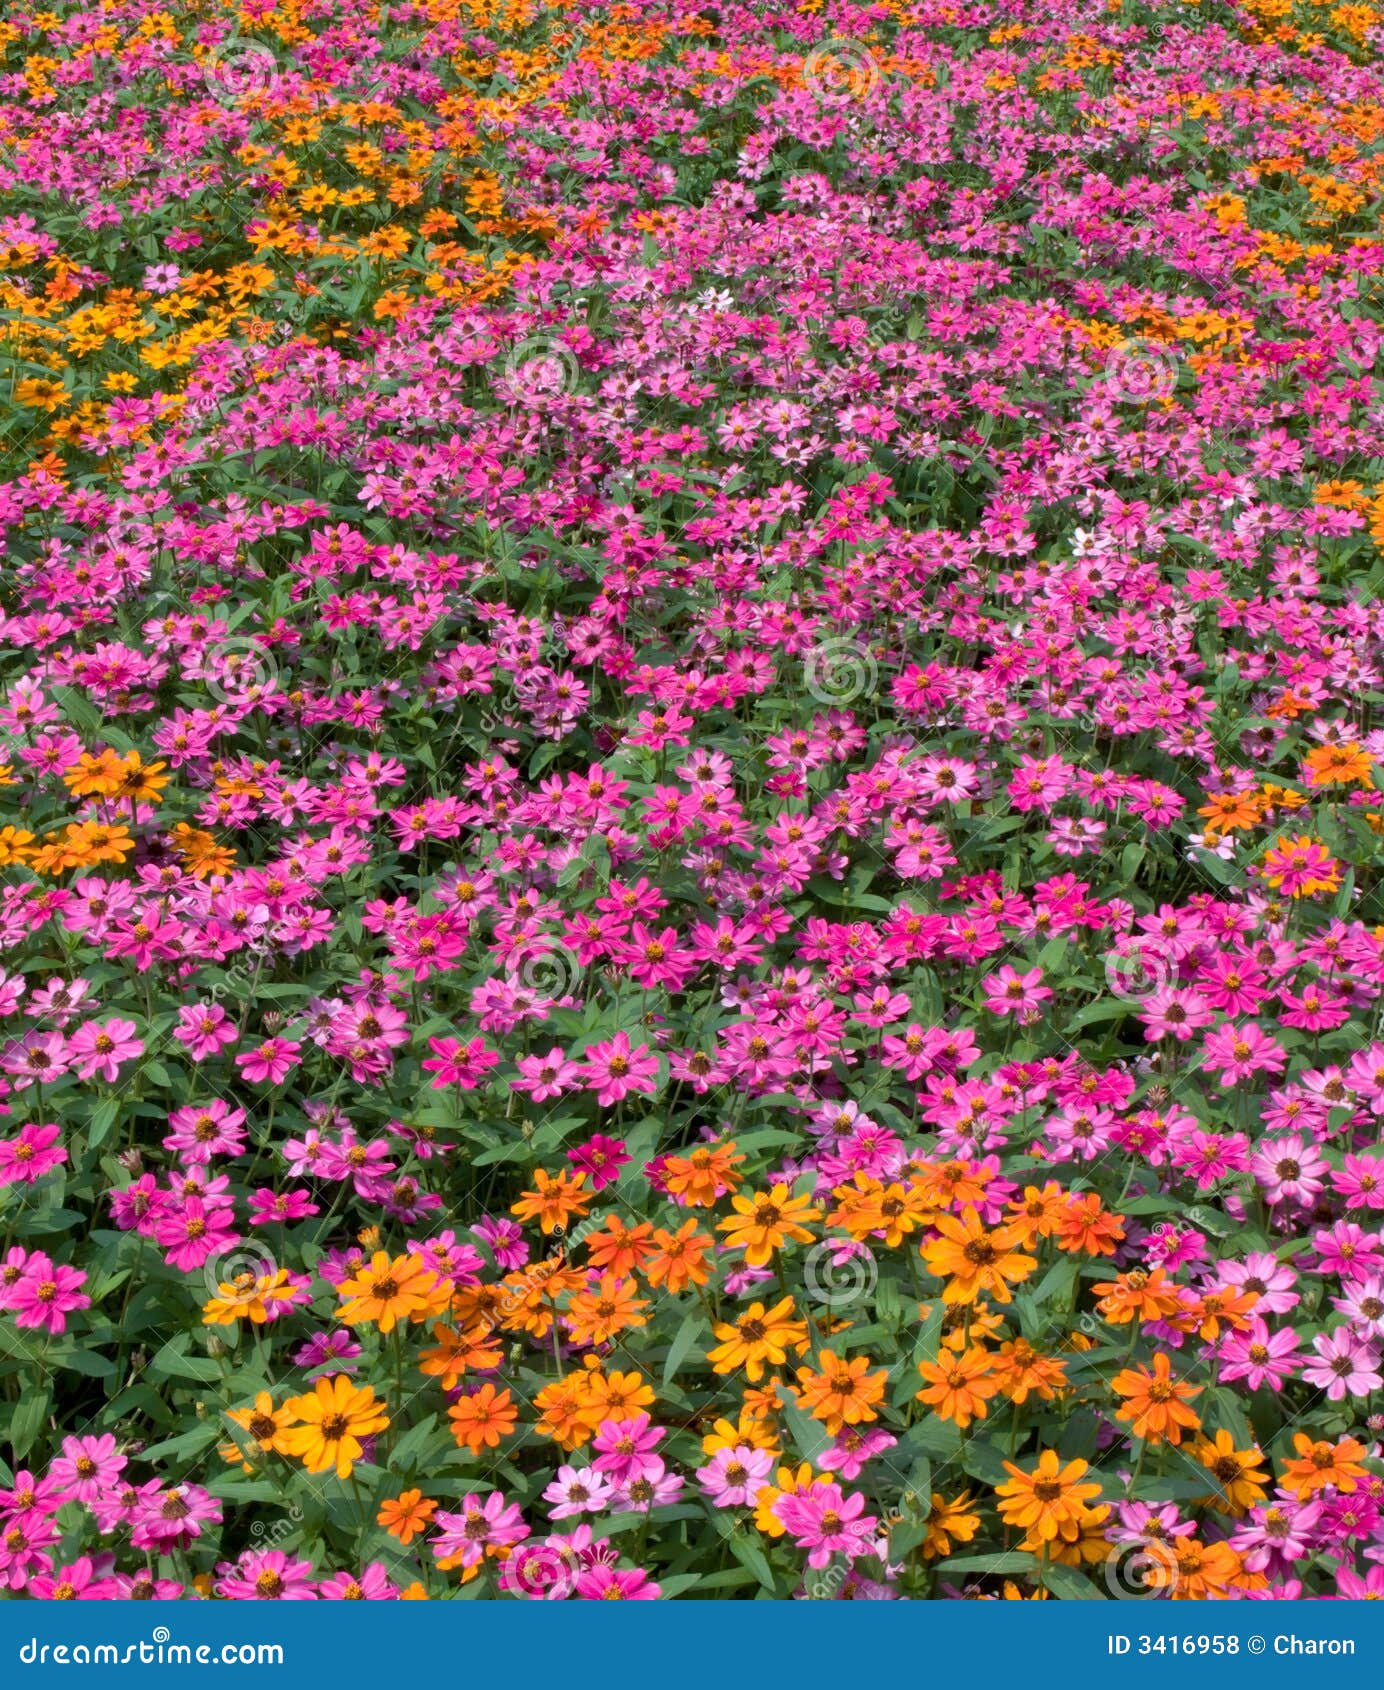 Flower Sea Colorful Flowerbed Royalty Free Stock Photos 